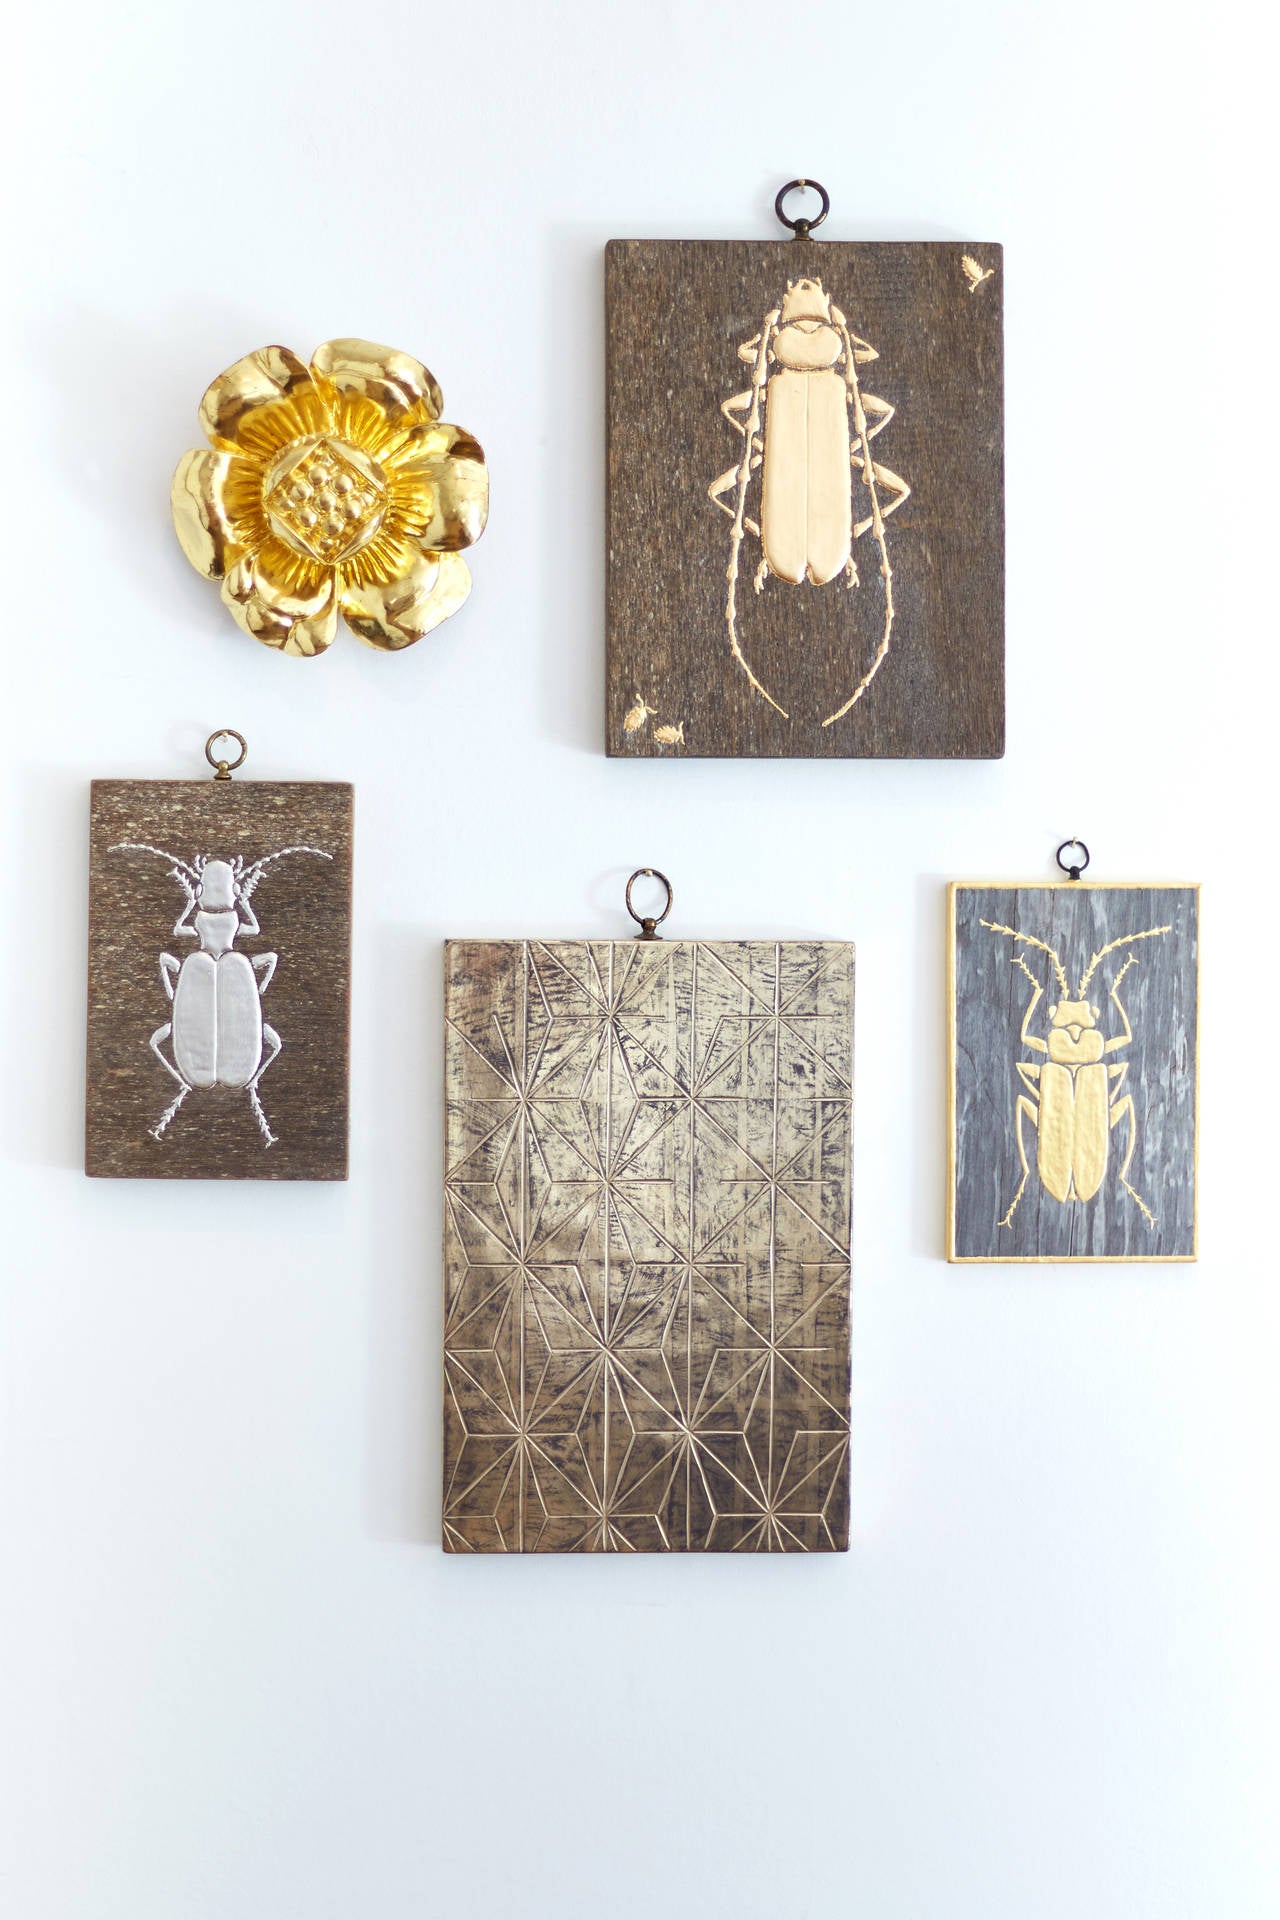 A collection of five panels decorated using a mixture of different gilding and gesso techniques

Large Beetle - raised gesso beetle gilded with 23 carat gold leaf on mahogany (25cm x 19cm)
Small palladium beetle - raised gesso beetle gilded with